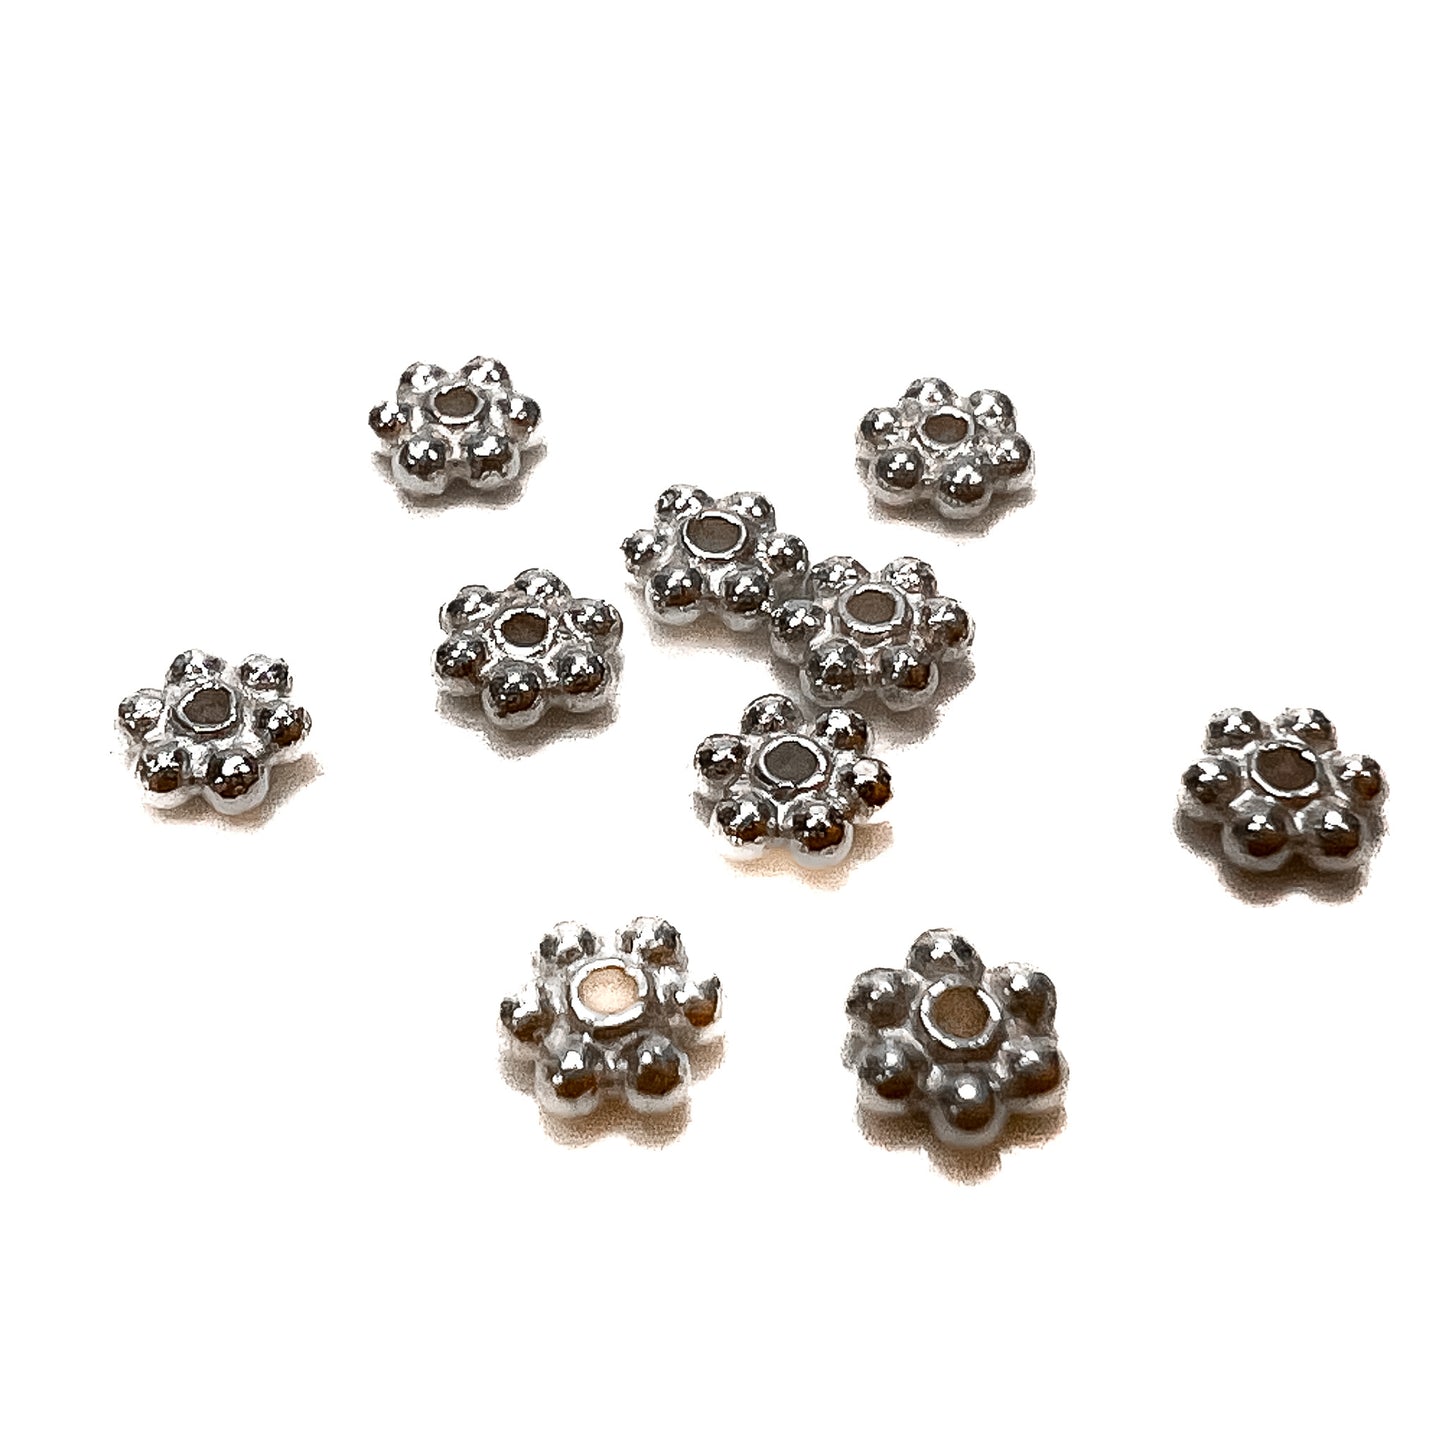 3mm Daisy Spacer Bead (Bright Sterling Silver) - 20 pcs.